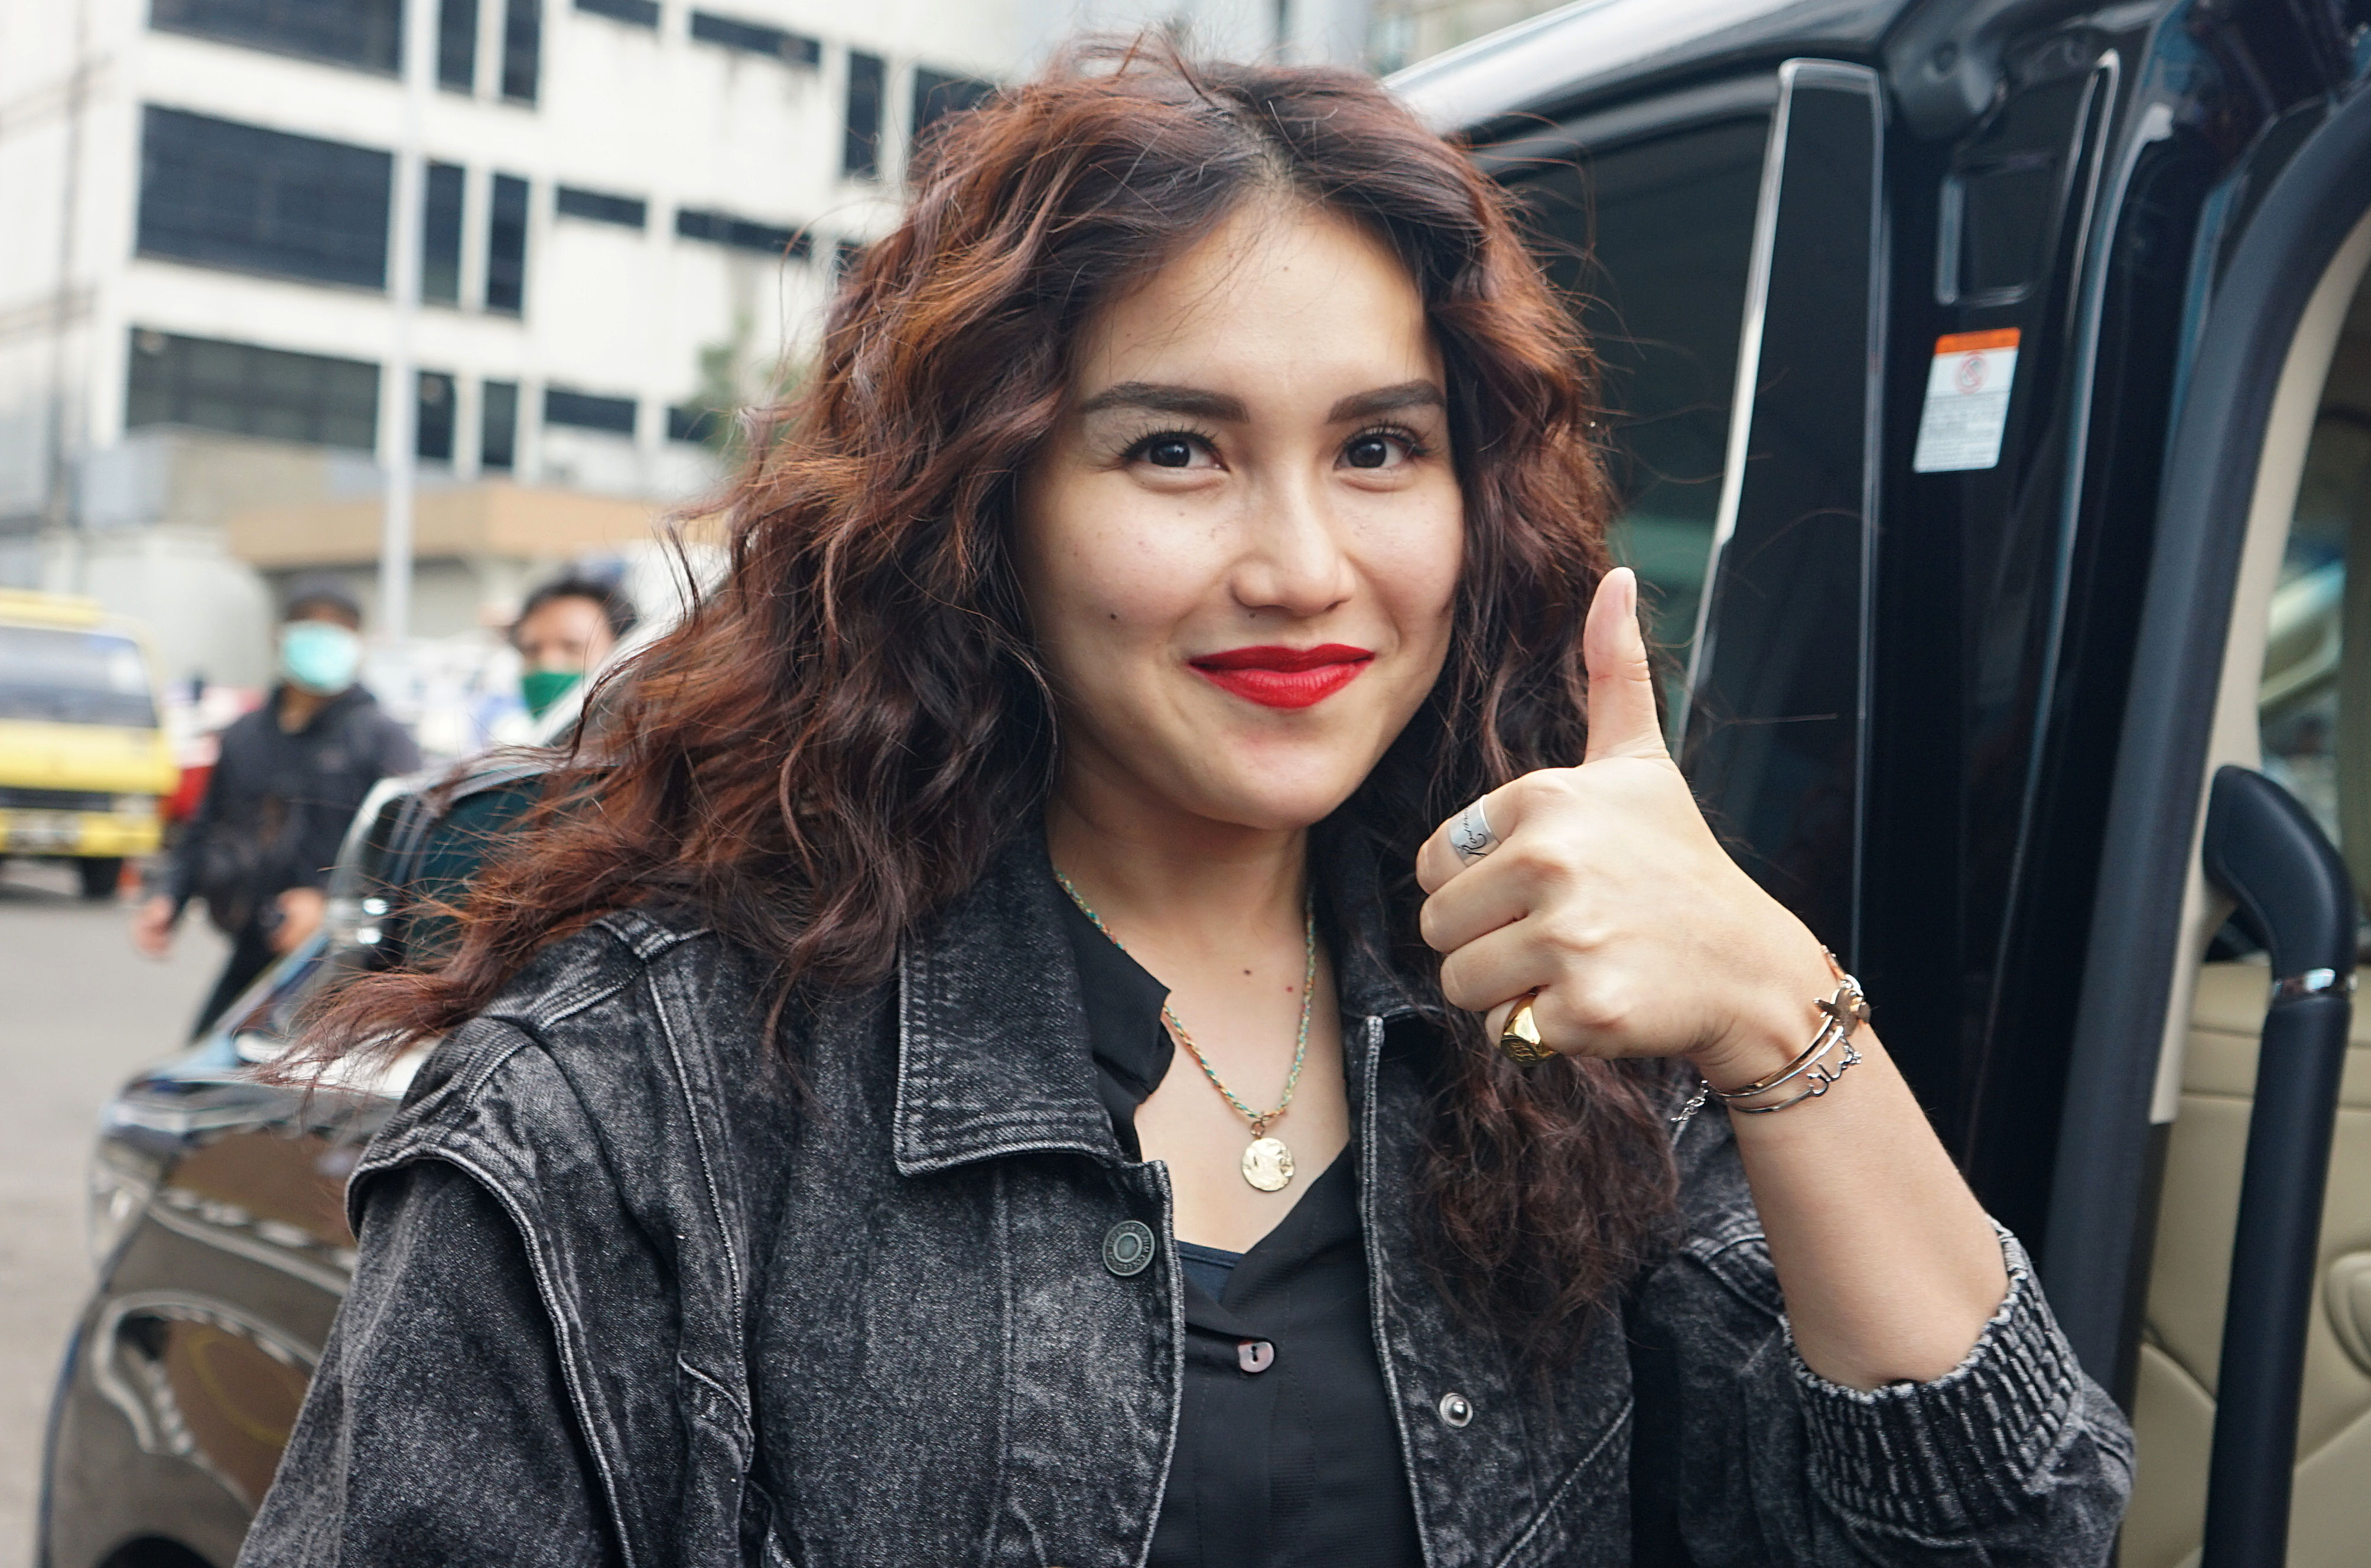 Appearing with a New Atmosphere, This is the Reason Ayu Ting Ting Changed Her Hairstyle